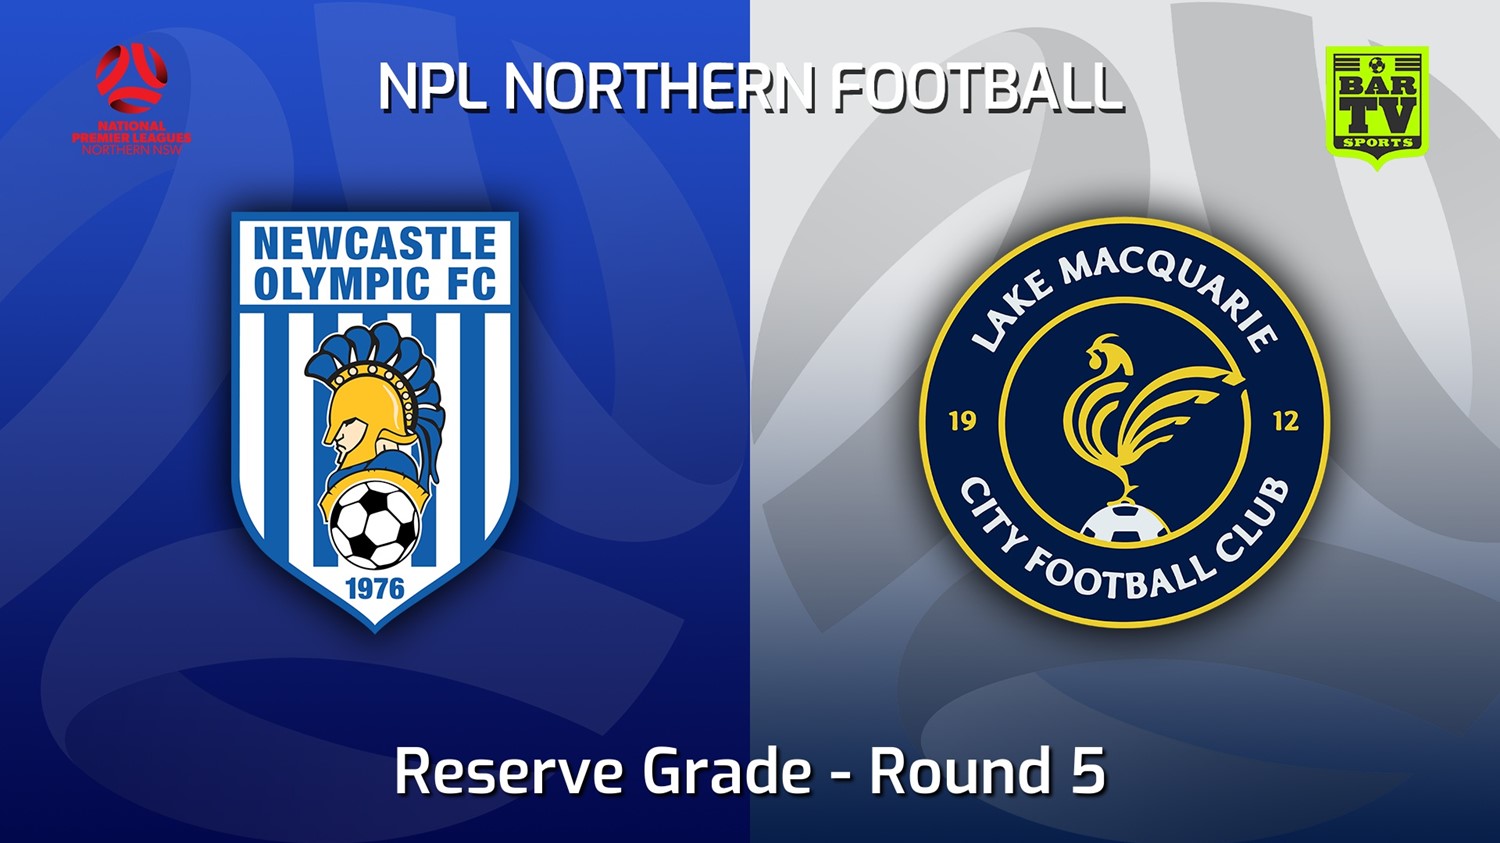 220405-NNSW NPLM Res Round 5 - Newcastle Olympic Res v Lake Macquarie City FC Res Minigame Slate Image